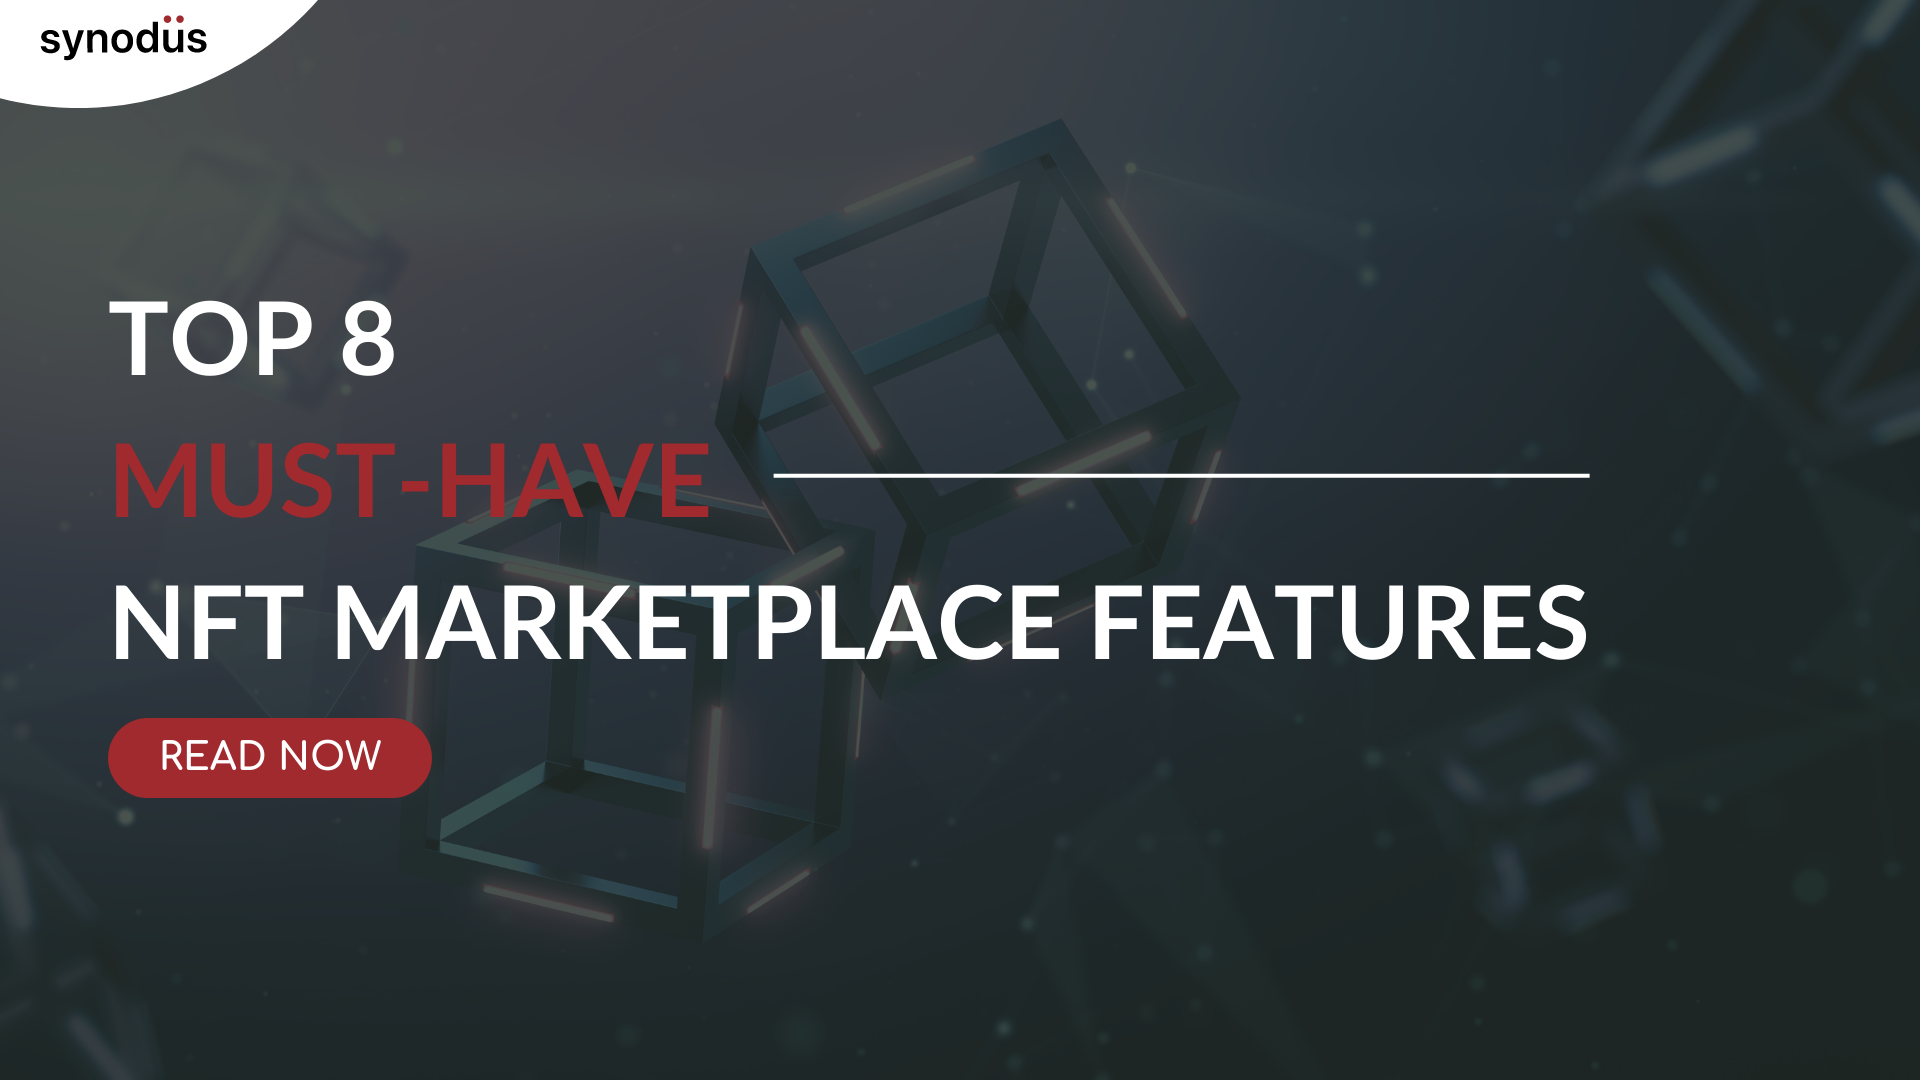 Top 8 Must-have NFT Marketplace Features That You Need To Know